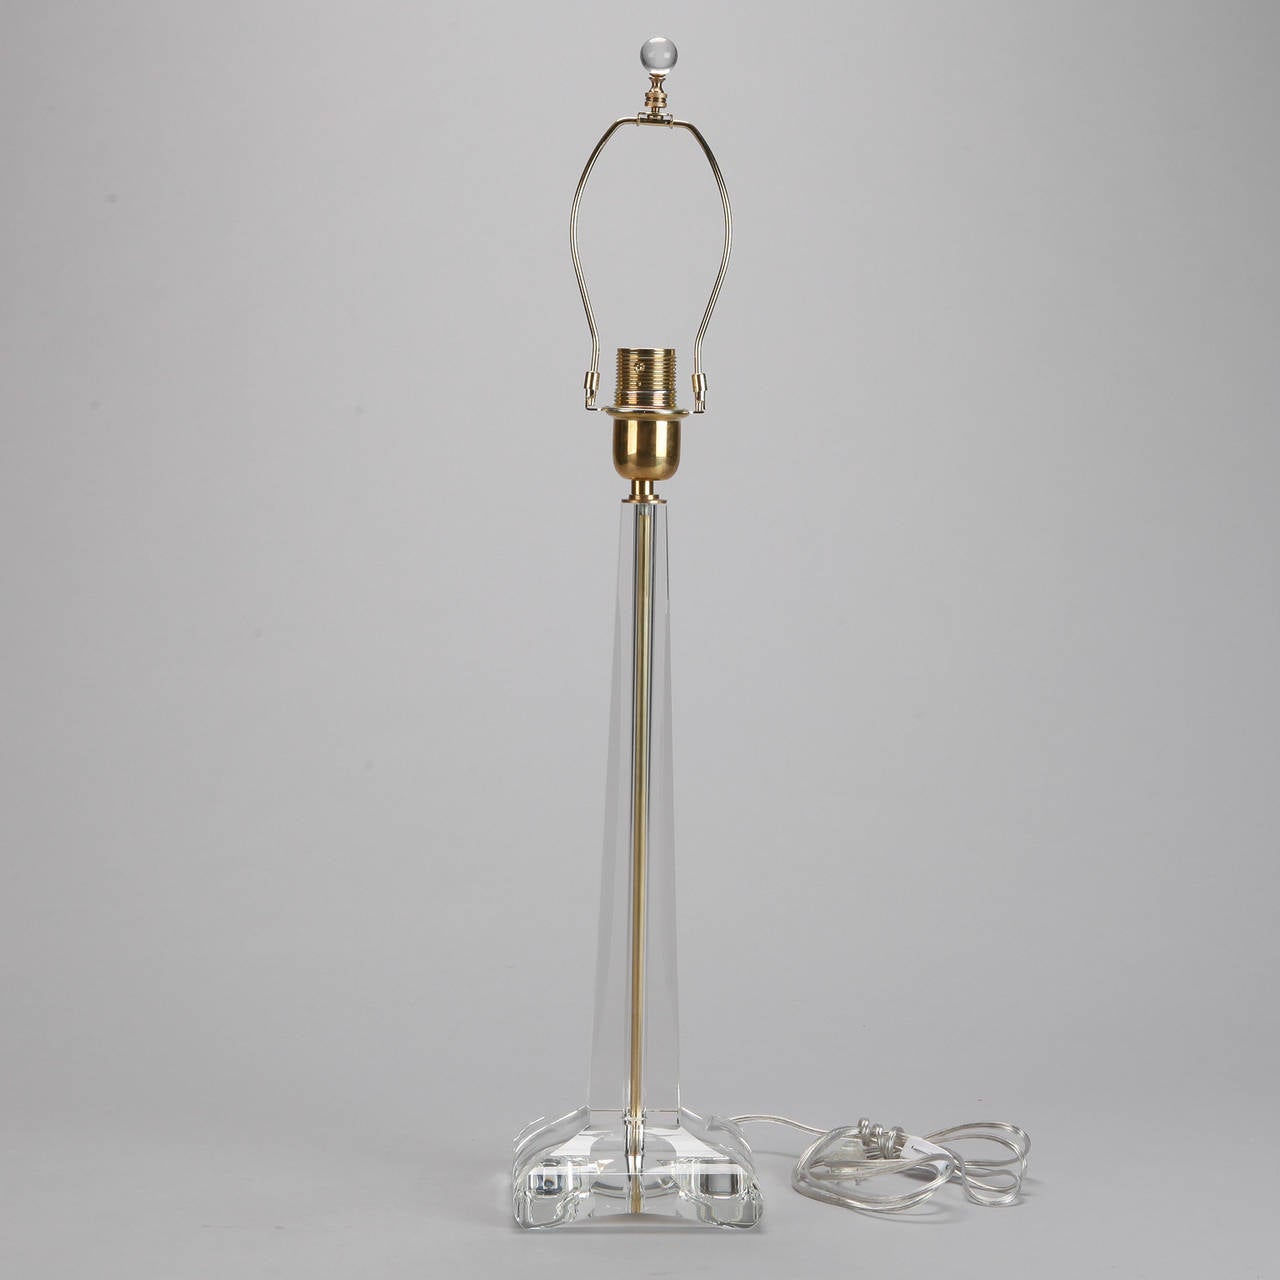 Circa 1970s tall, elegant clear glass Murano table lamp with brass fittings and center shaft in modified obelisk form with round square base. New wiring for US electrical standards.